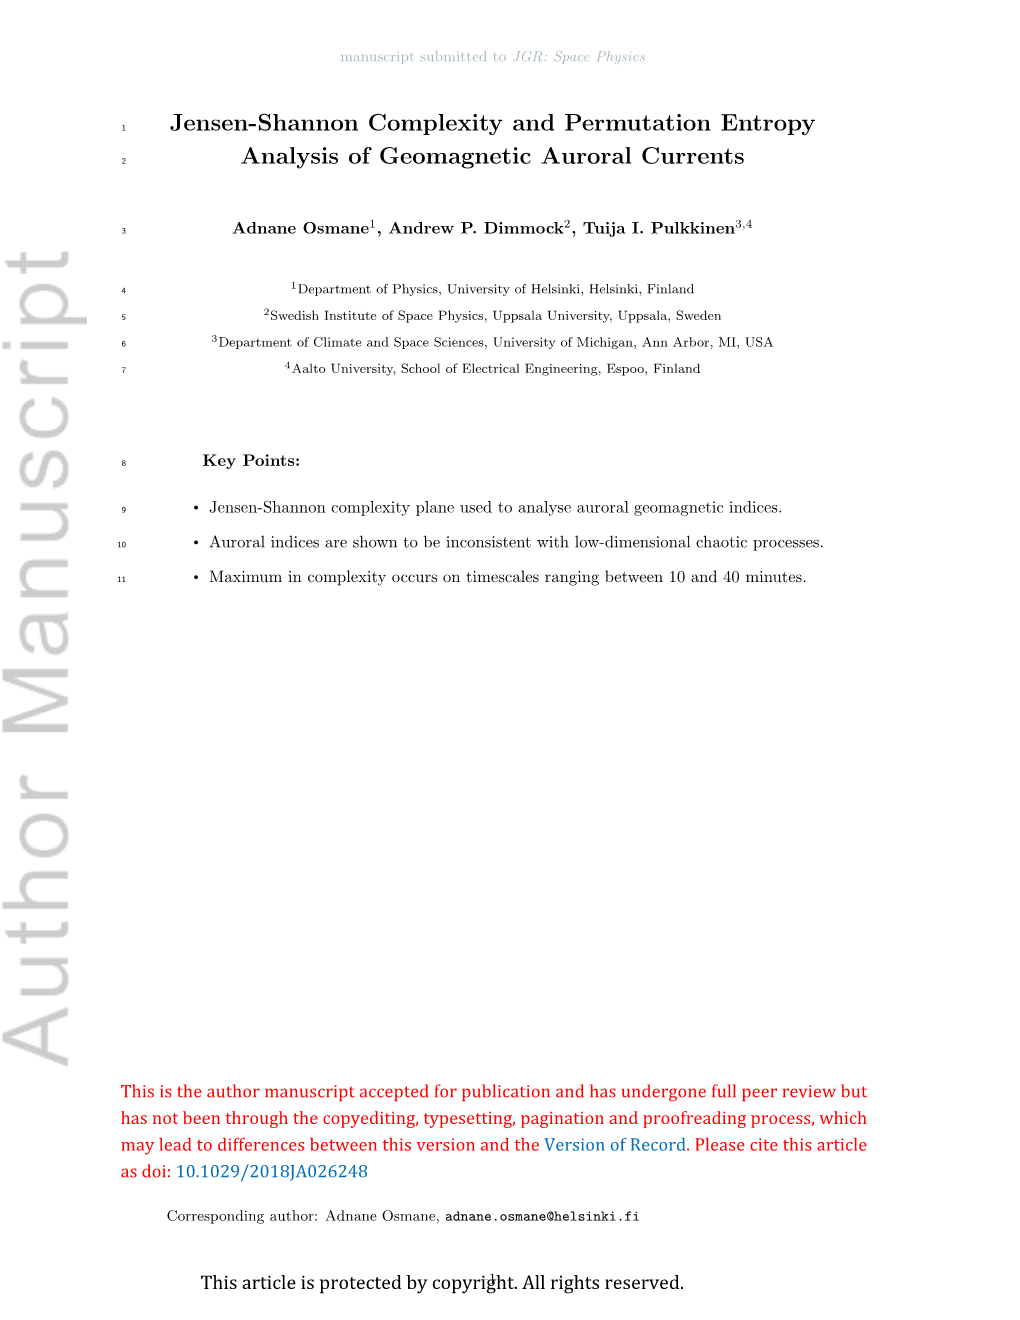 Jensen-Shannon Complexity and Permutation Entropy Analysis Of